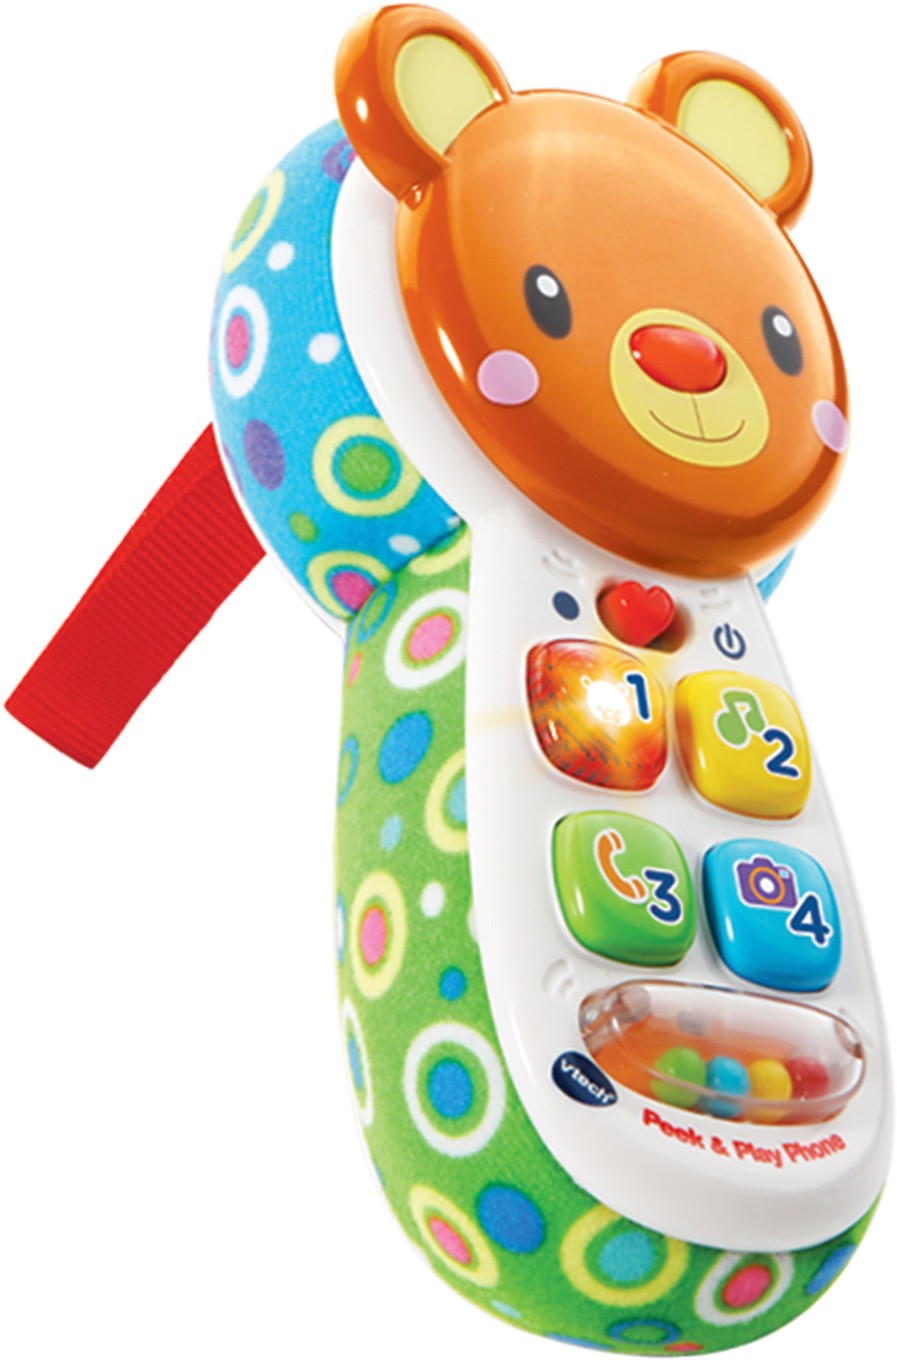 VTech Baby Peek-a-boo Mirror Play Phone 3-24 months Educational Toy Brand New 